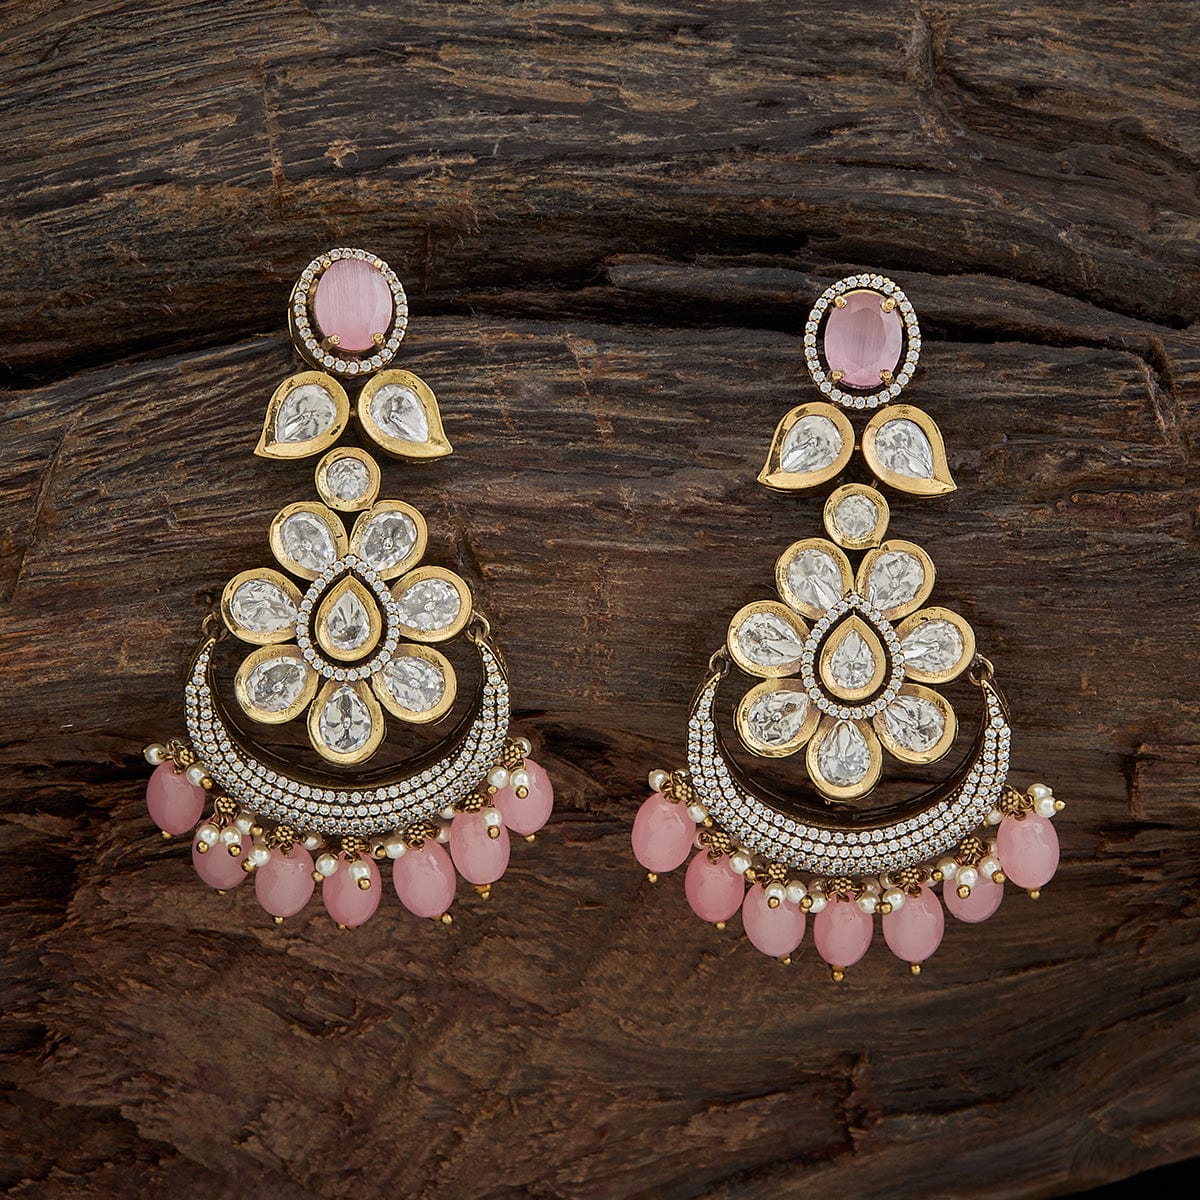 Indian Gold Plated Bollywood Style Pearl Kundan Earrings Pink Jewelry Set |  eBay